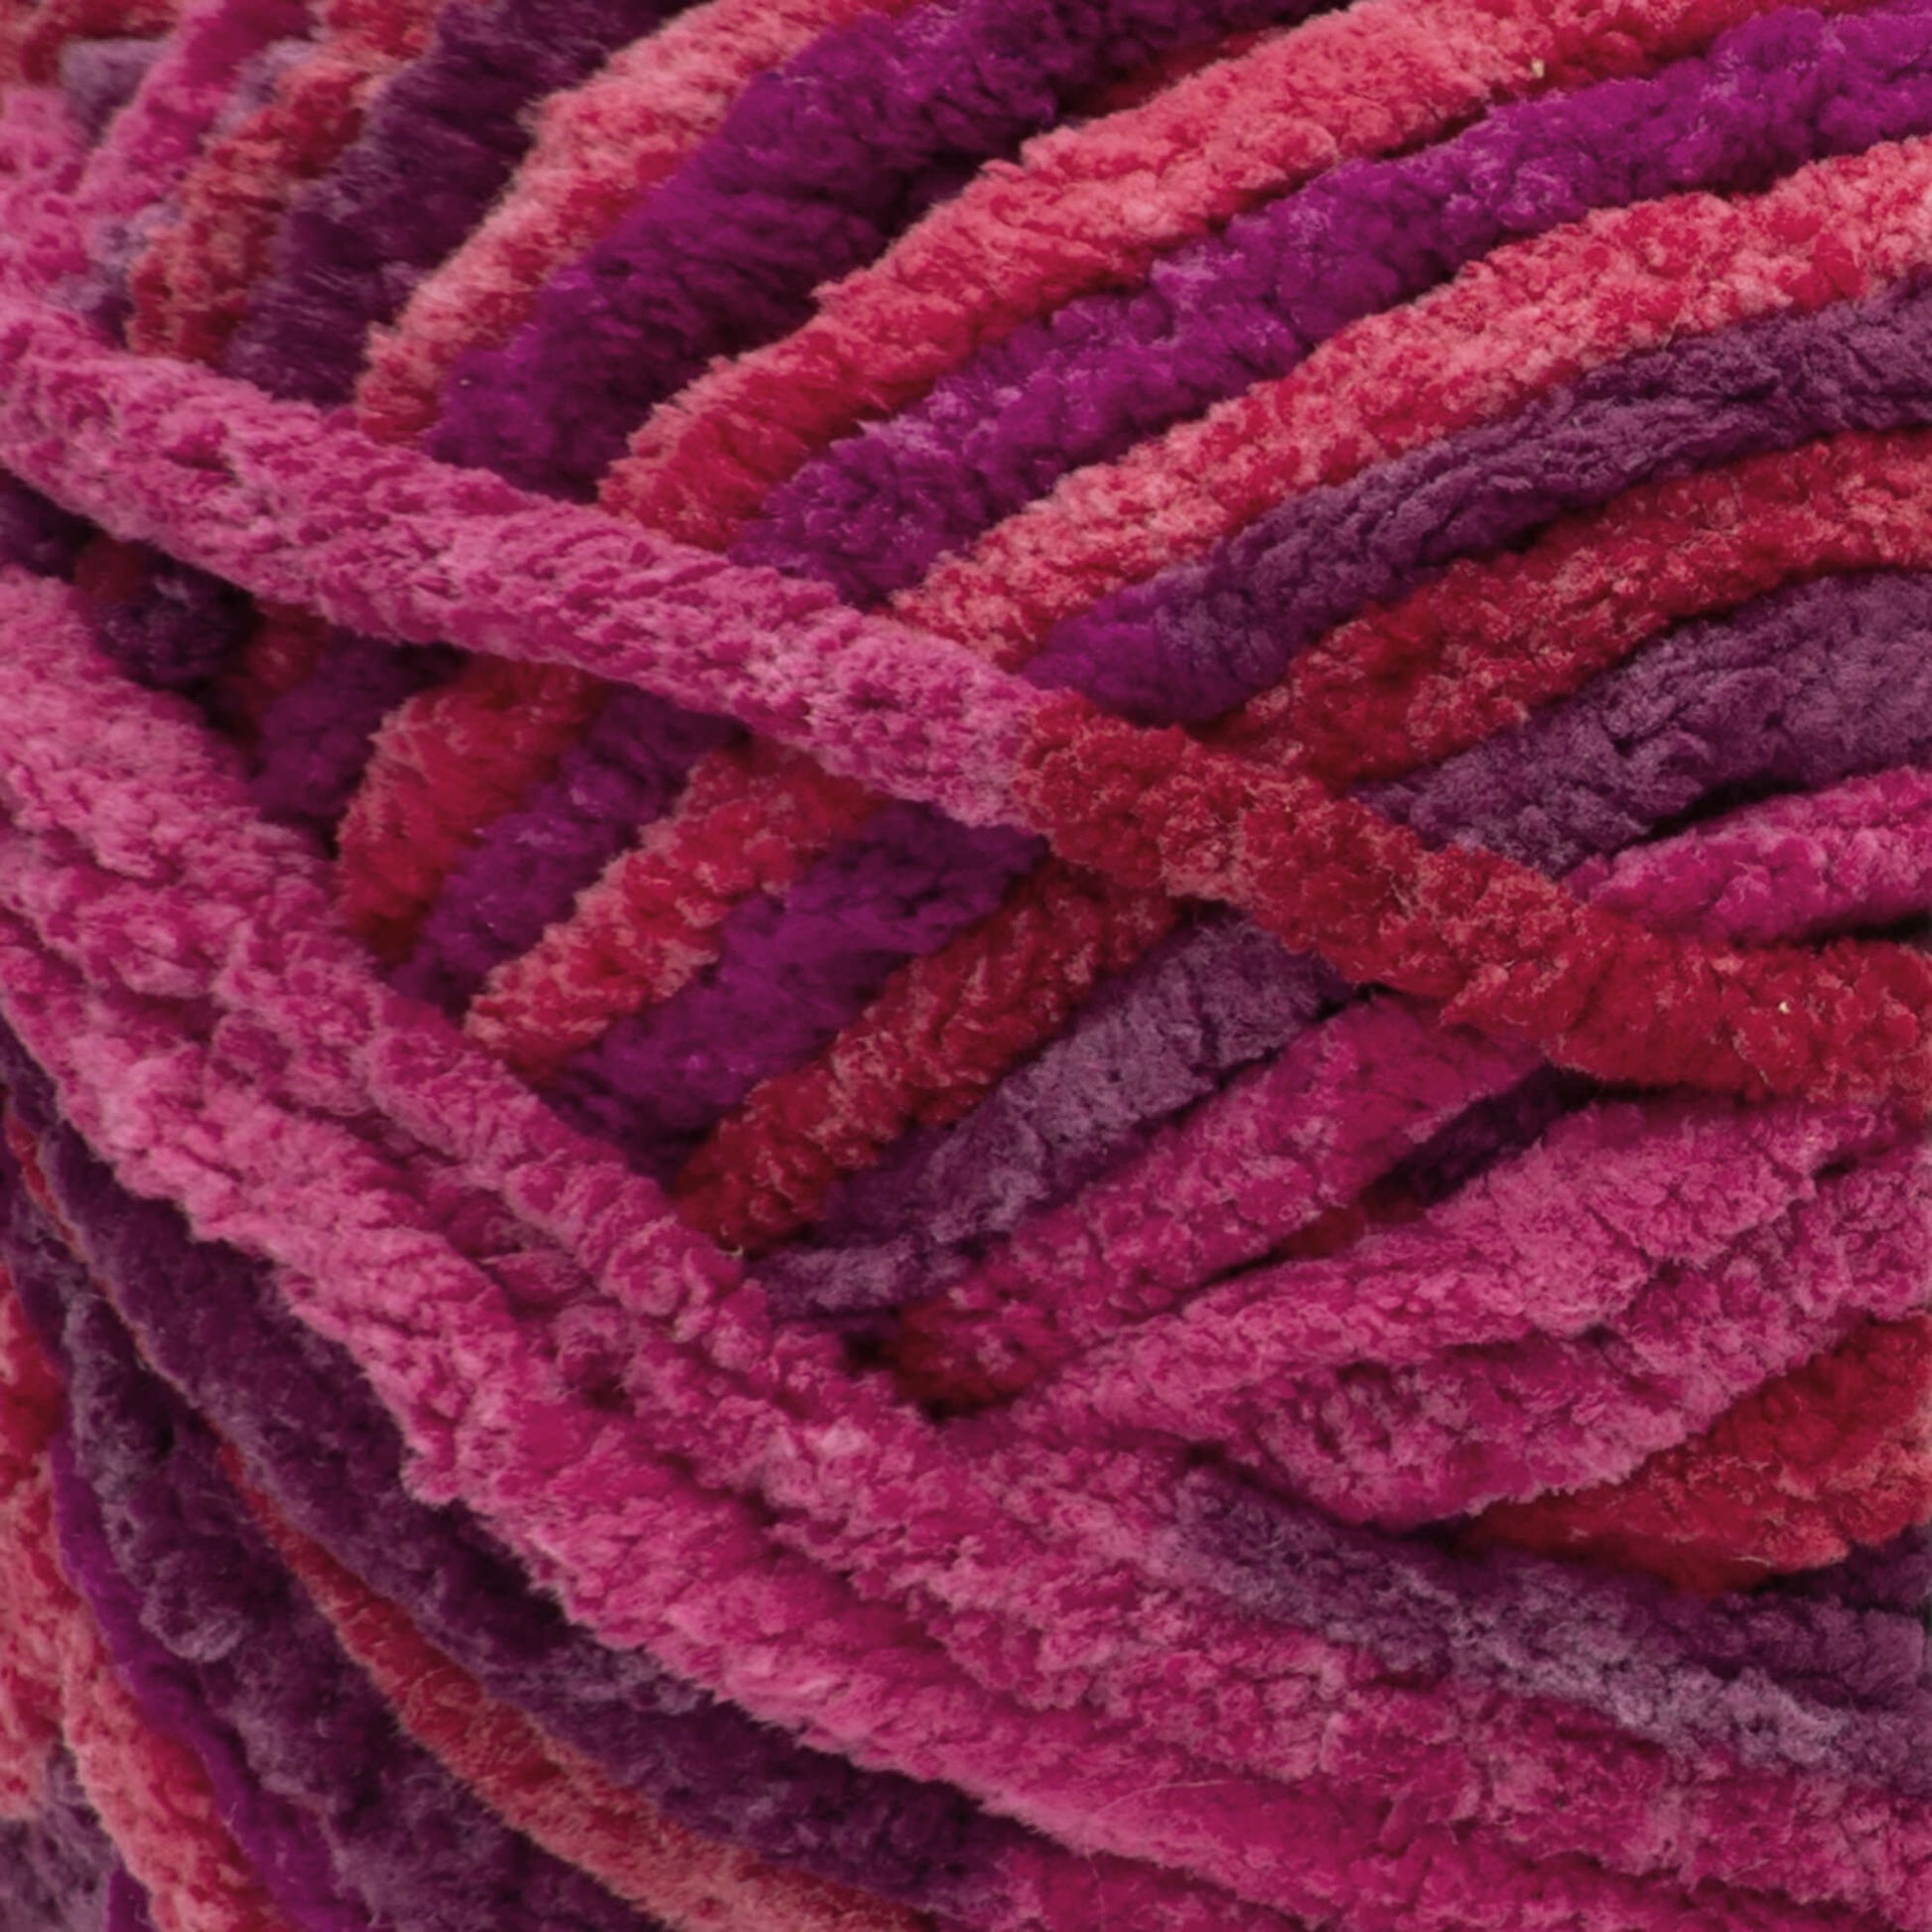 Red Heart Sweet Home Yarn - Discontinued Shades